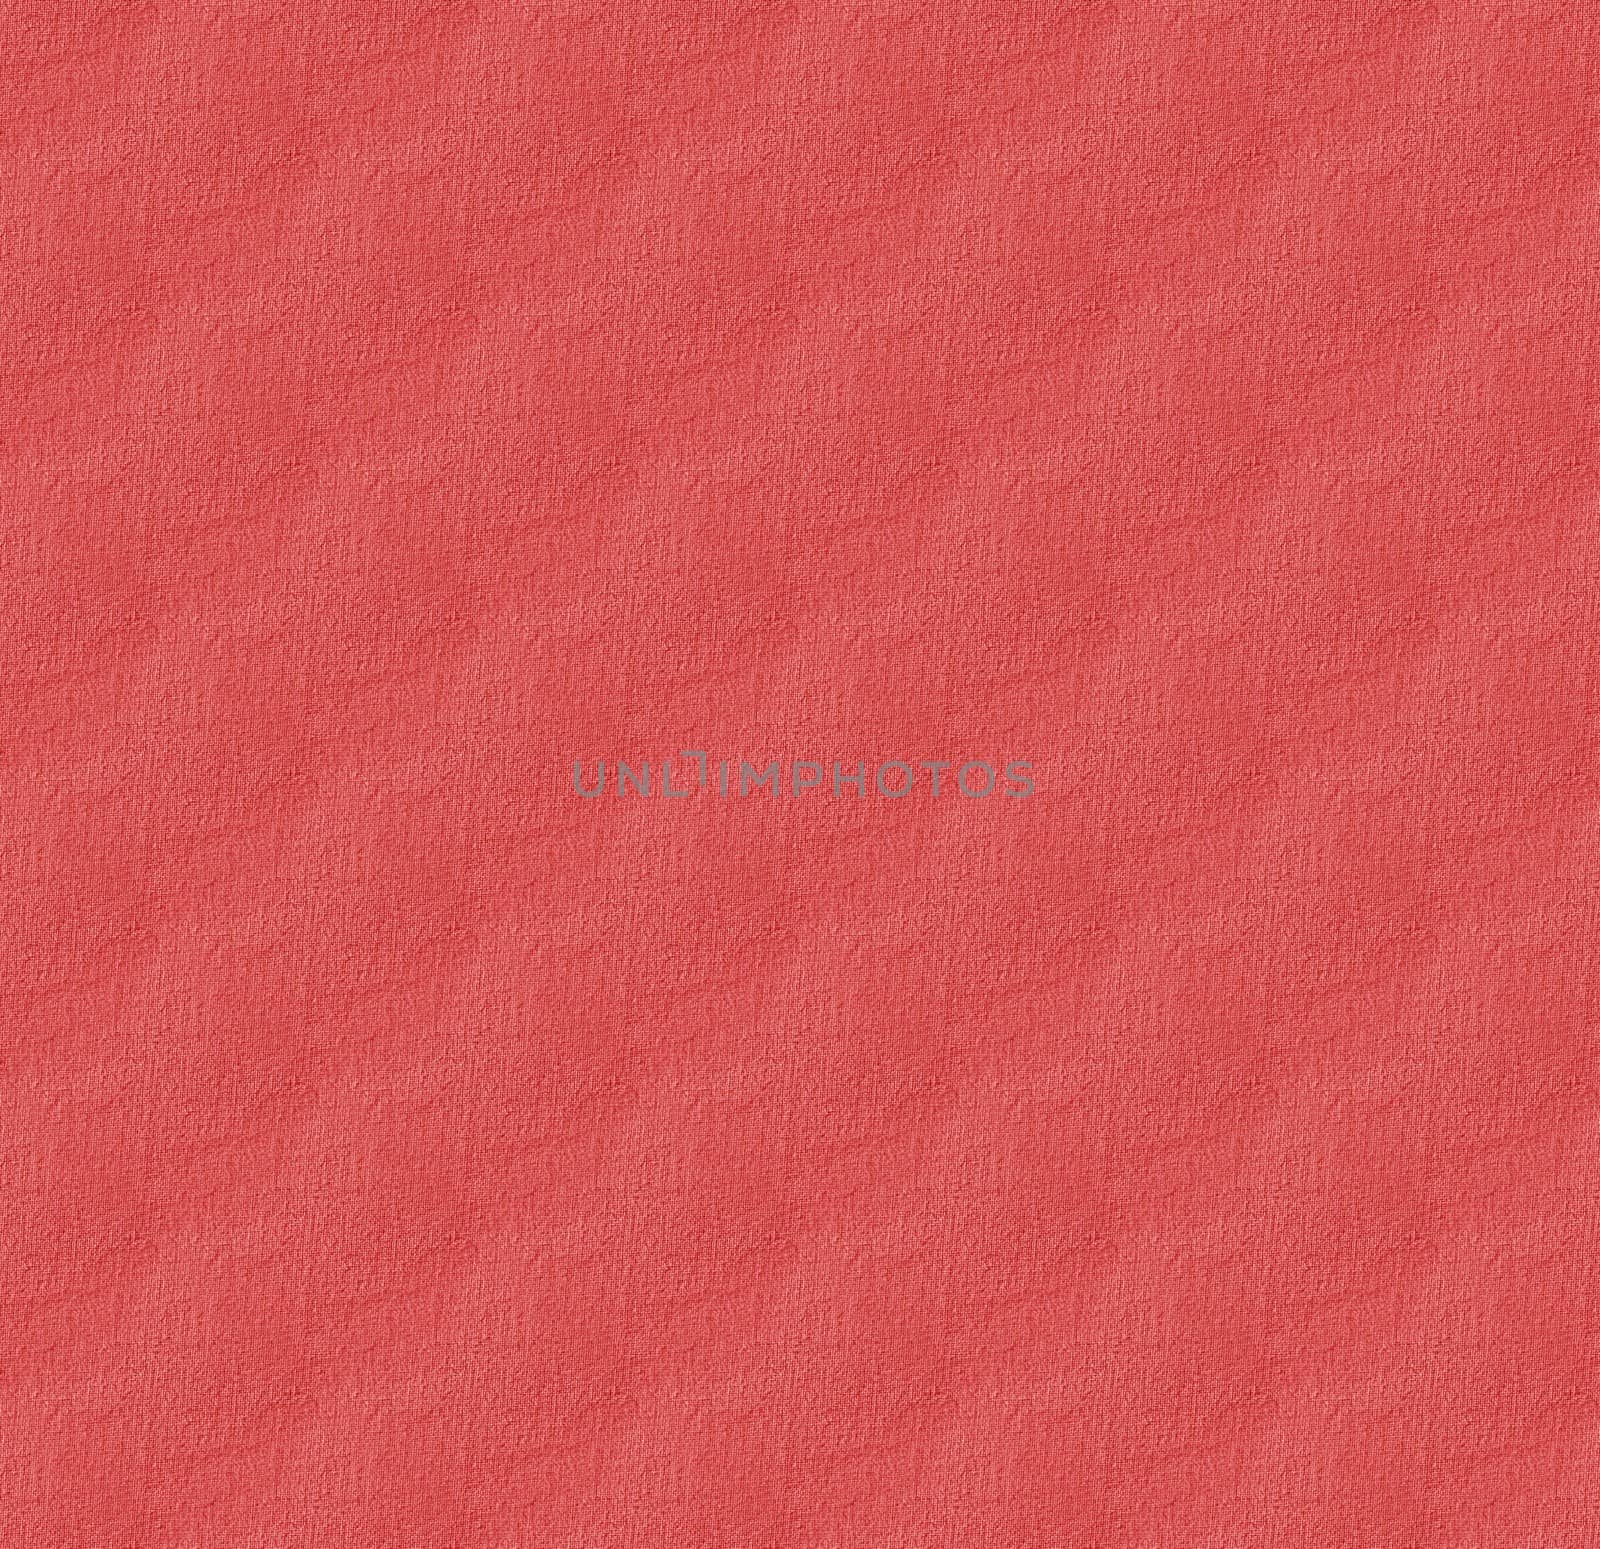 Red fabric as seamless tileable texture